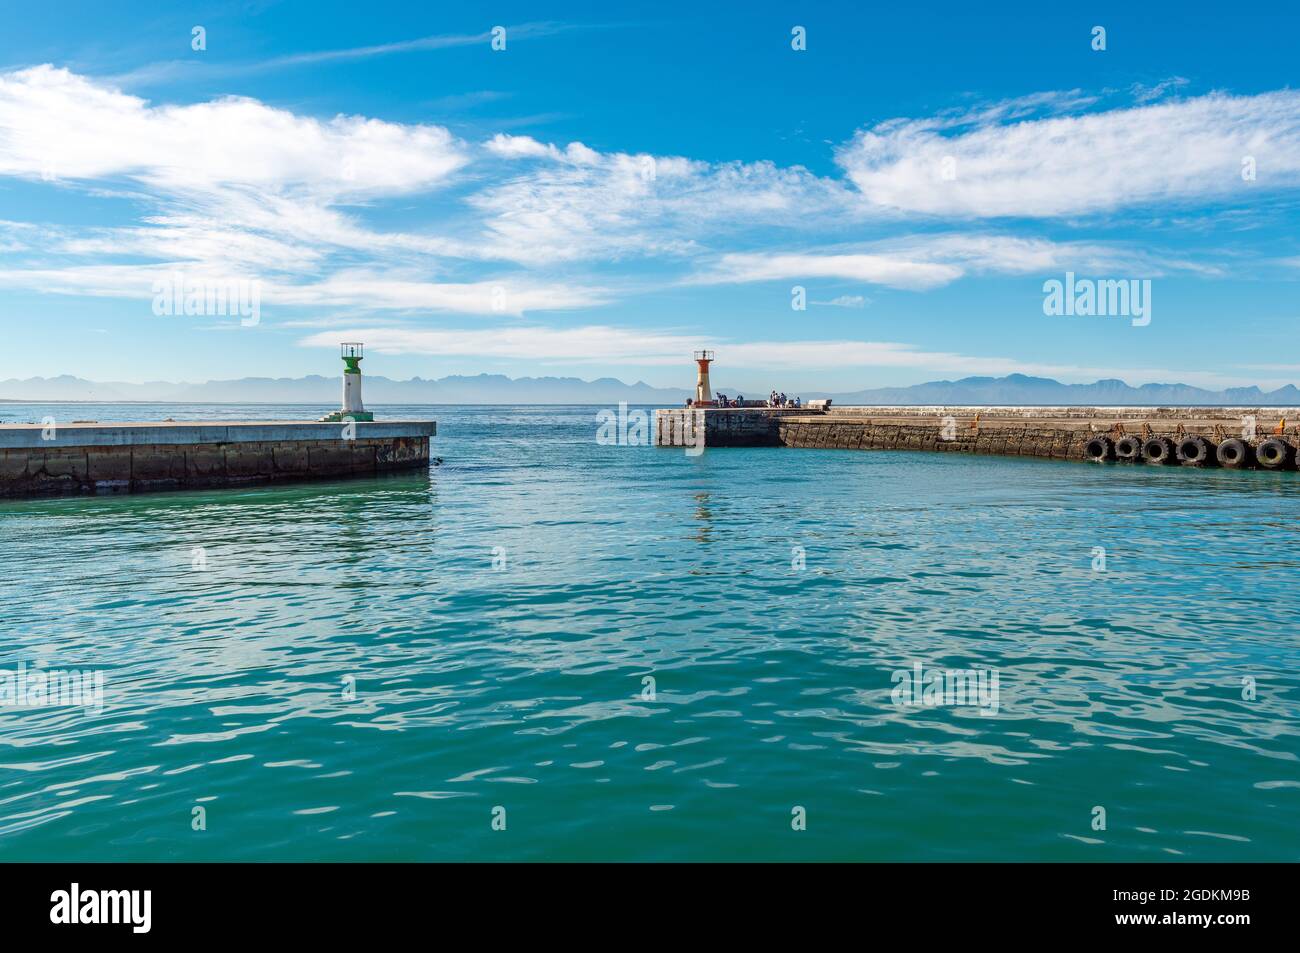 Piers with lighthouse in Kalk Bay harbor near Cape Town, South Africa. Stock Photo